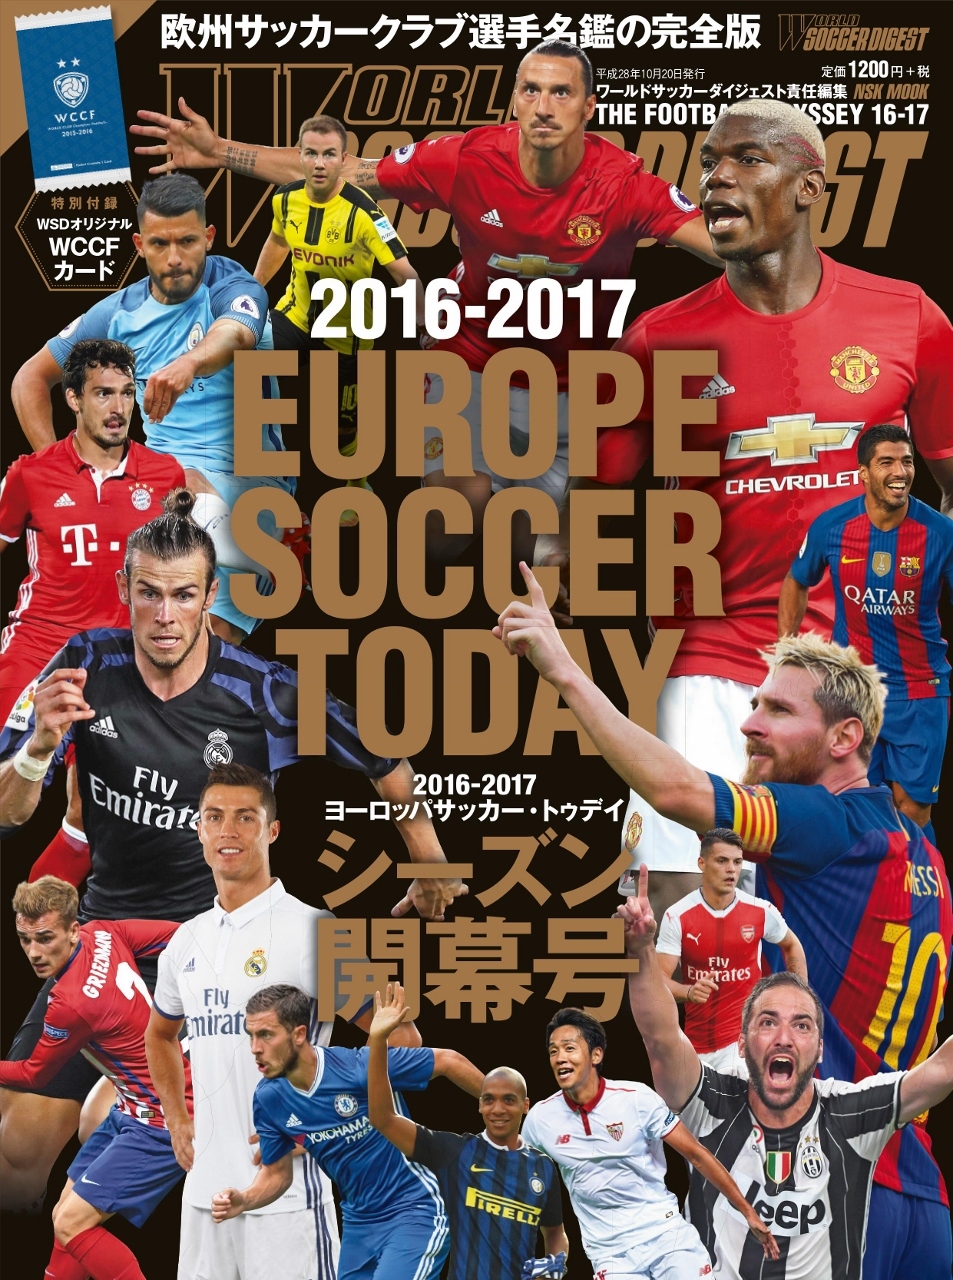 16 17 Europe Soccer Today 日本スポーツ企画